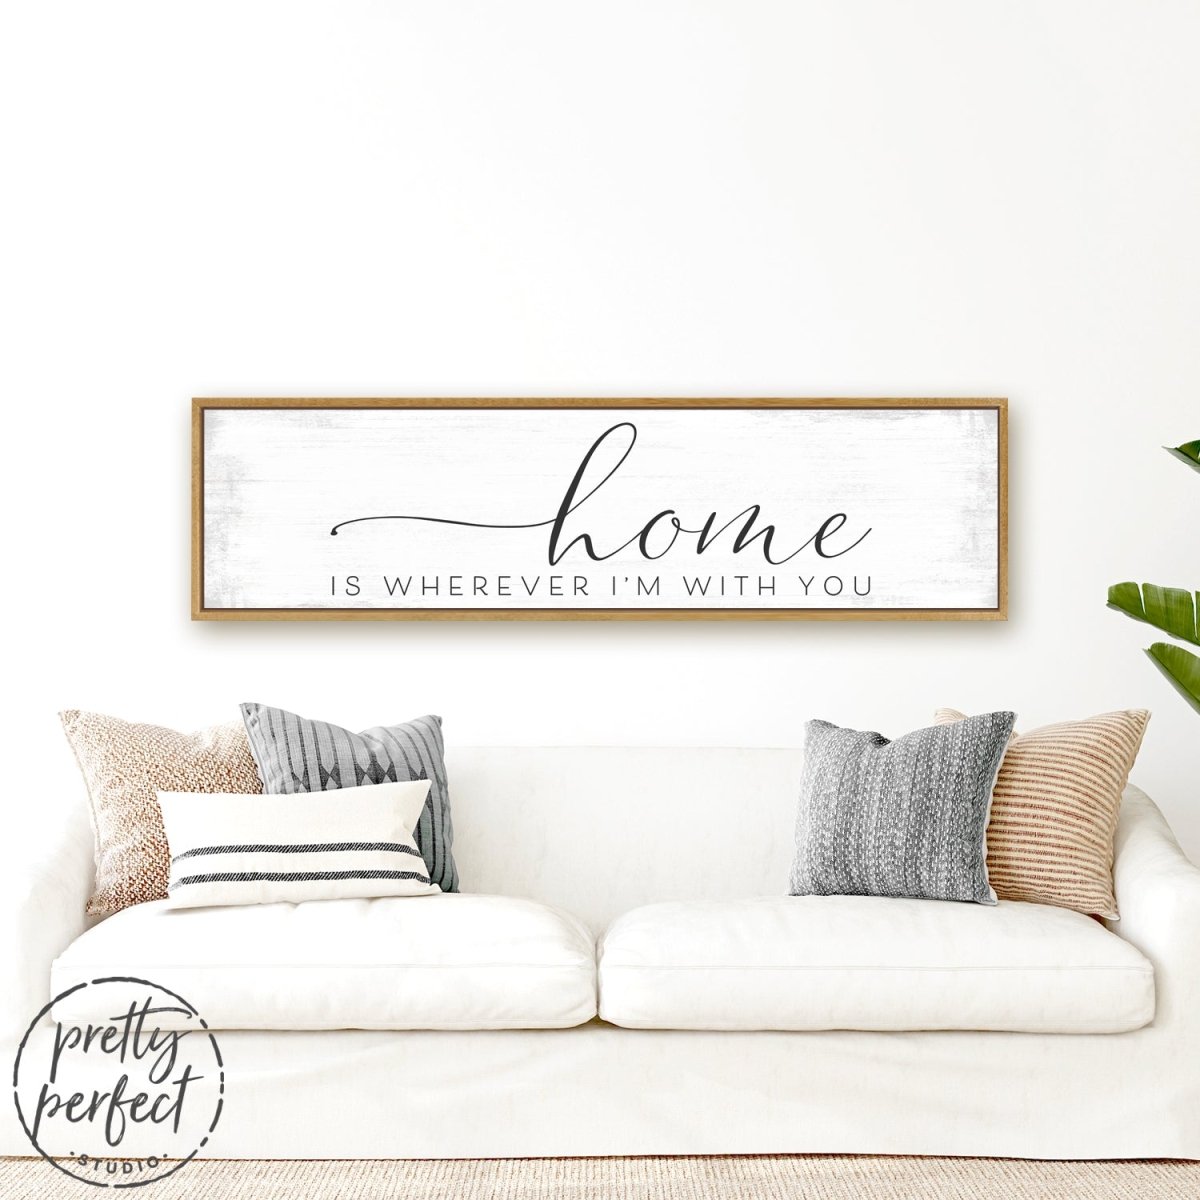 Home Is Wherever I'm With You Sign With Lowercase Text Above Couch - Pretty Perfect Studio